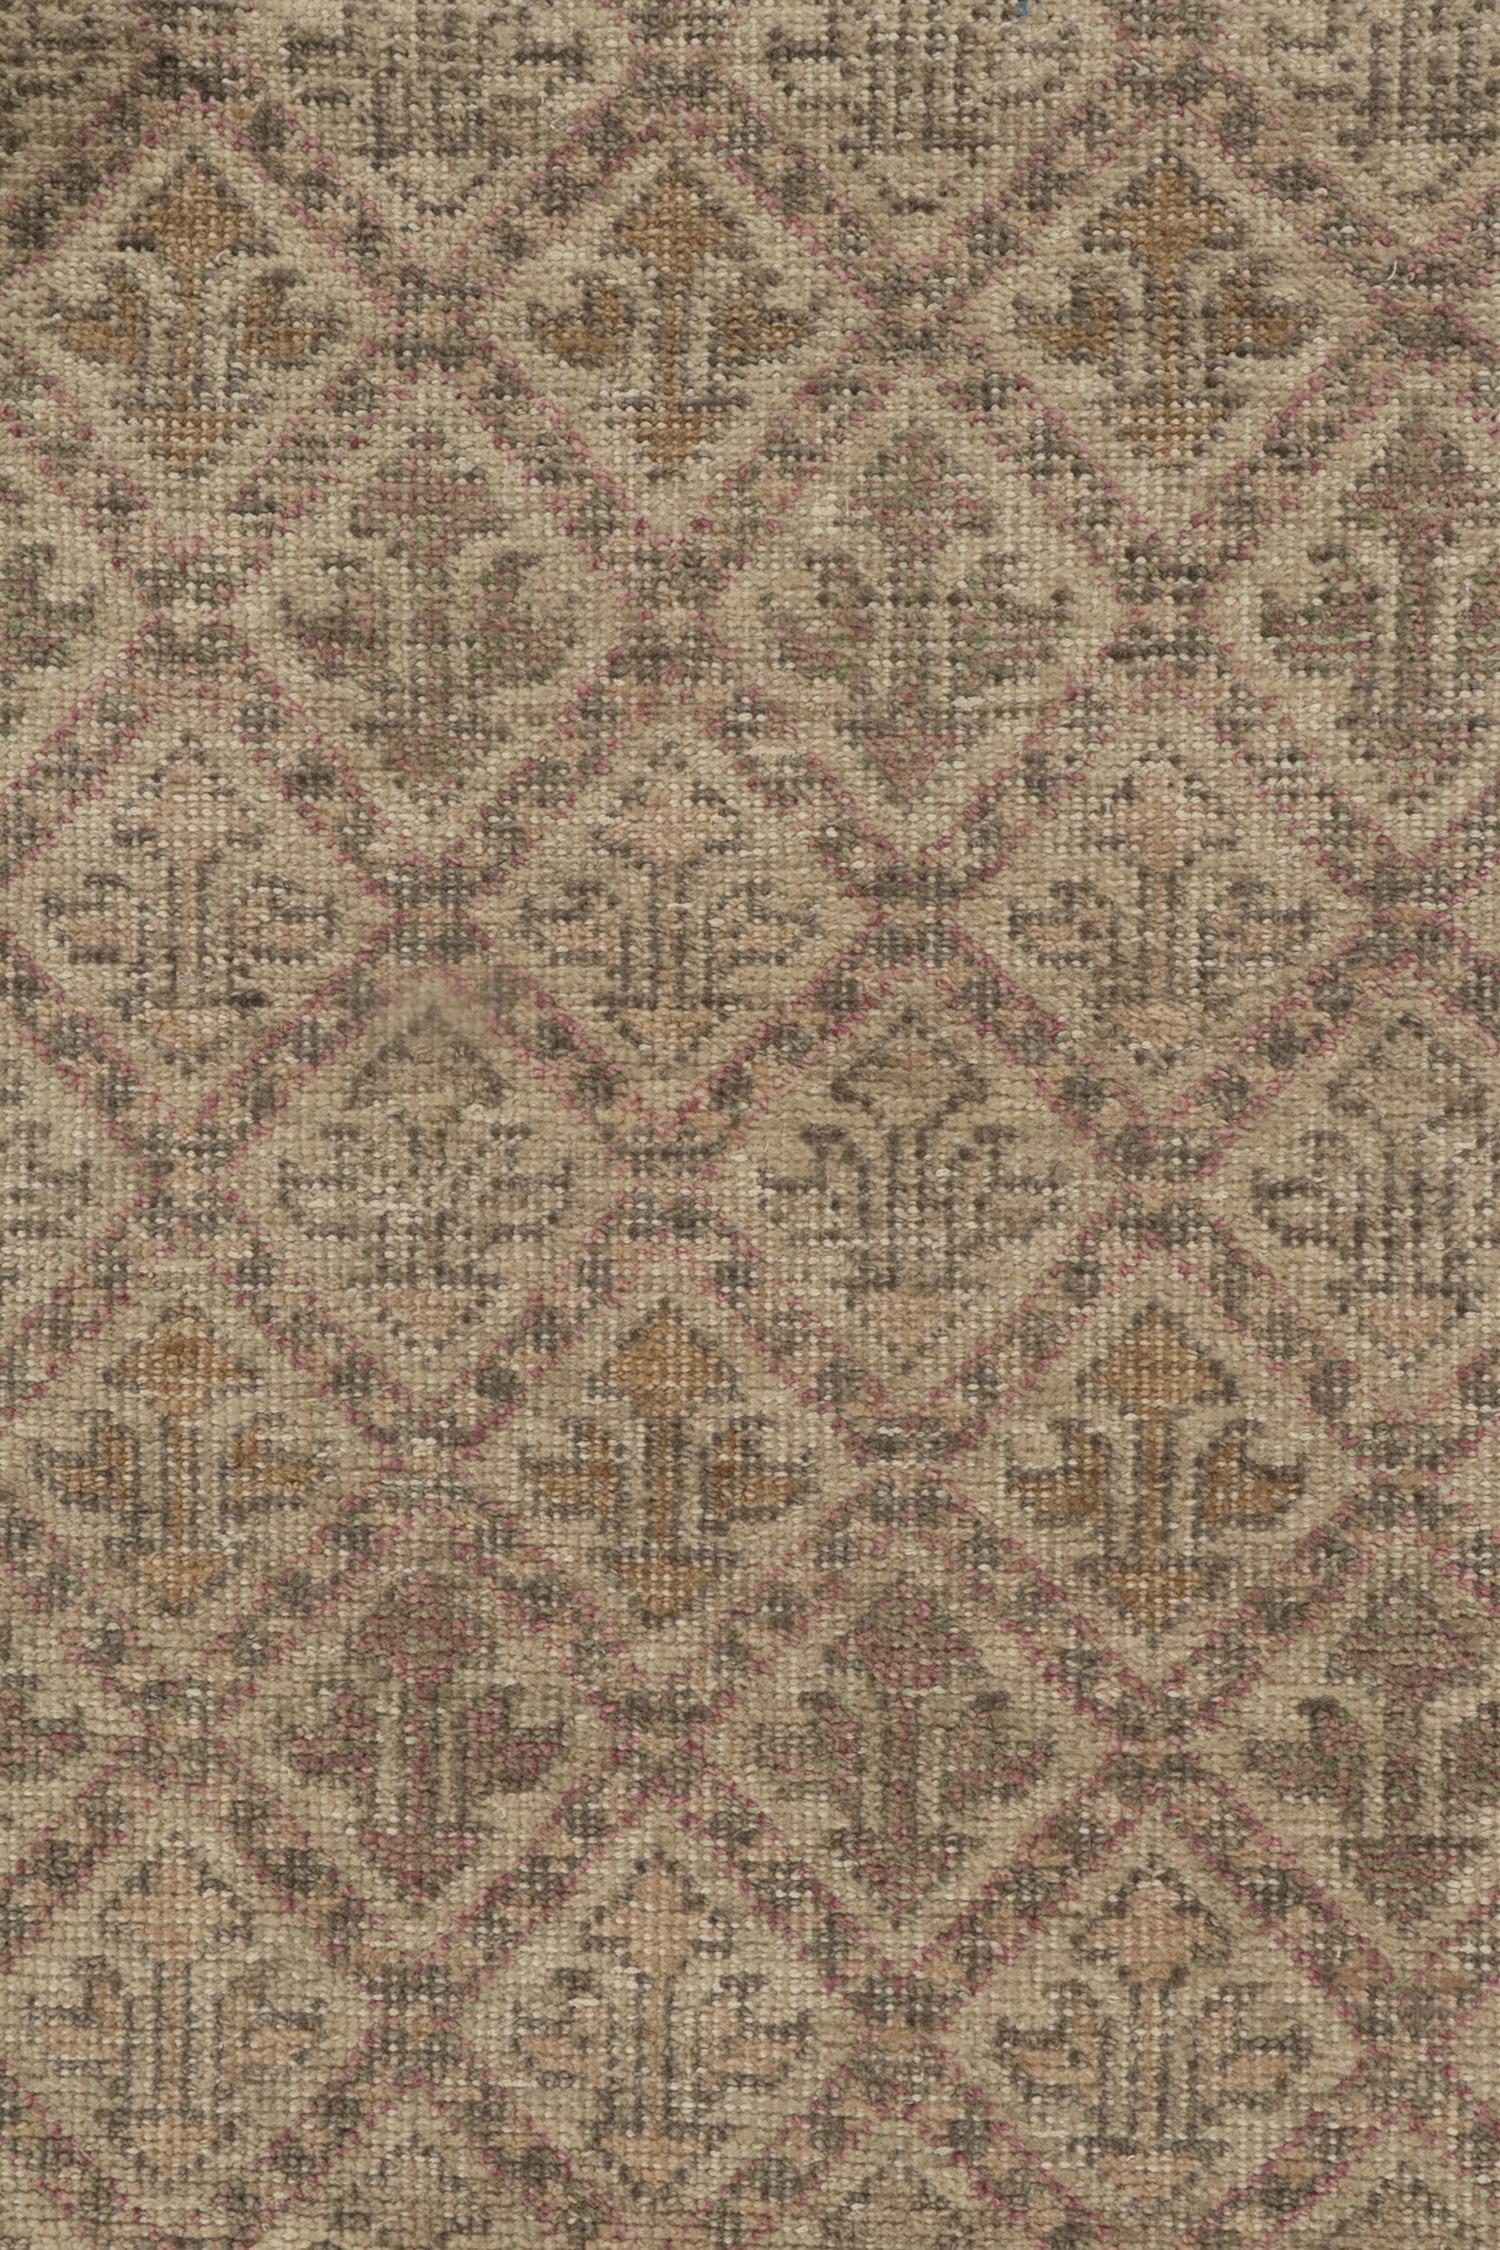 Contemporary Rug & Kilim’s Distressed Style Runner in Beige-Brown & Grey Tribal Patterns For Sale